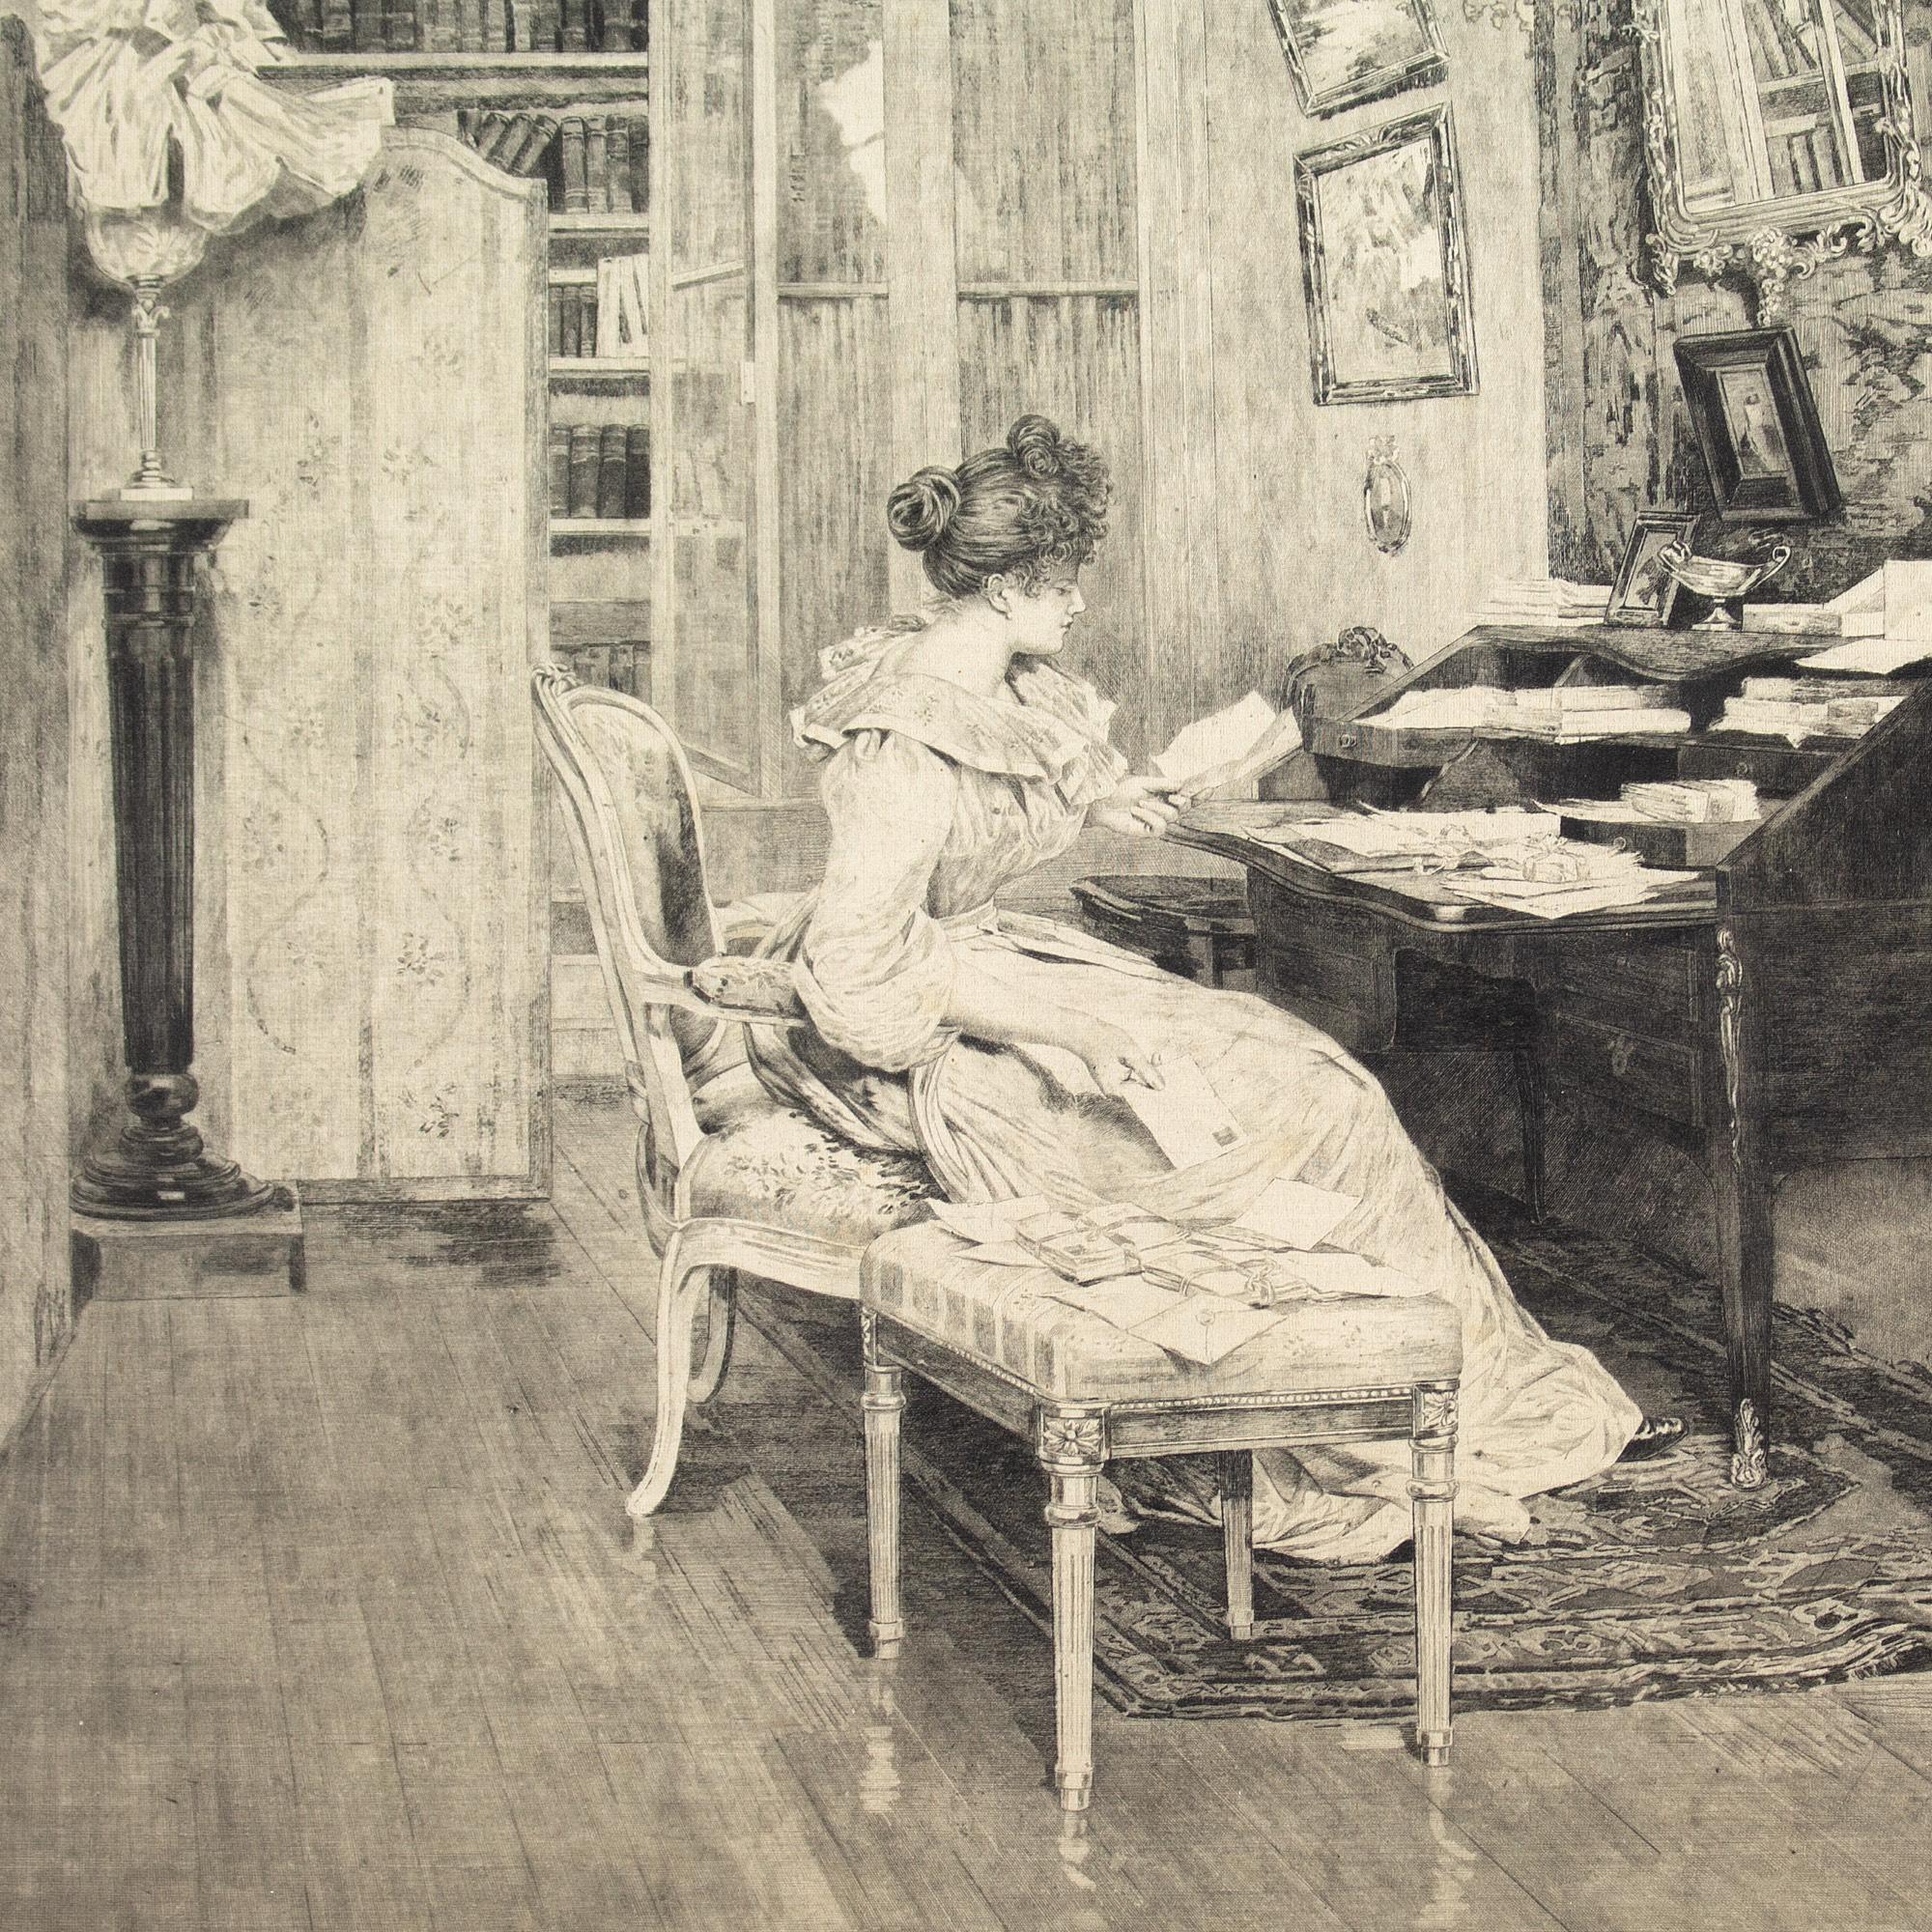 This late-19th-century British School gravure depicts a lady reading within an interior setting.

Perched on the edge of a chair within a plush Victorian room, she�’s immersed in correspondence. Perhaps a letter from a loved one, a potential suitor